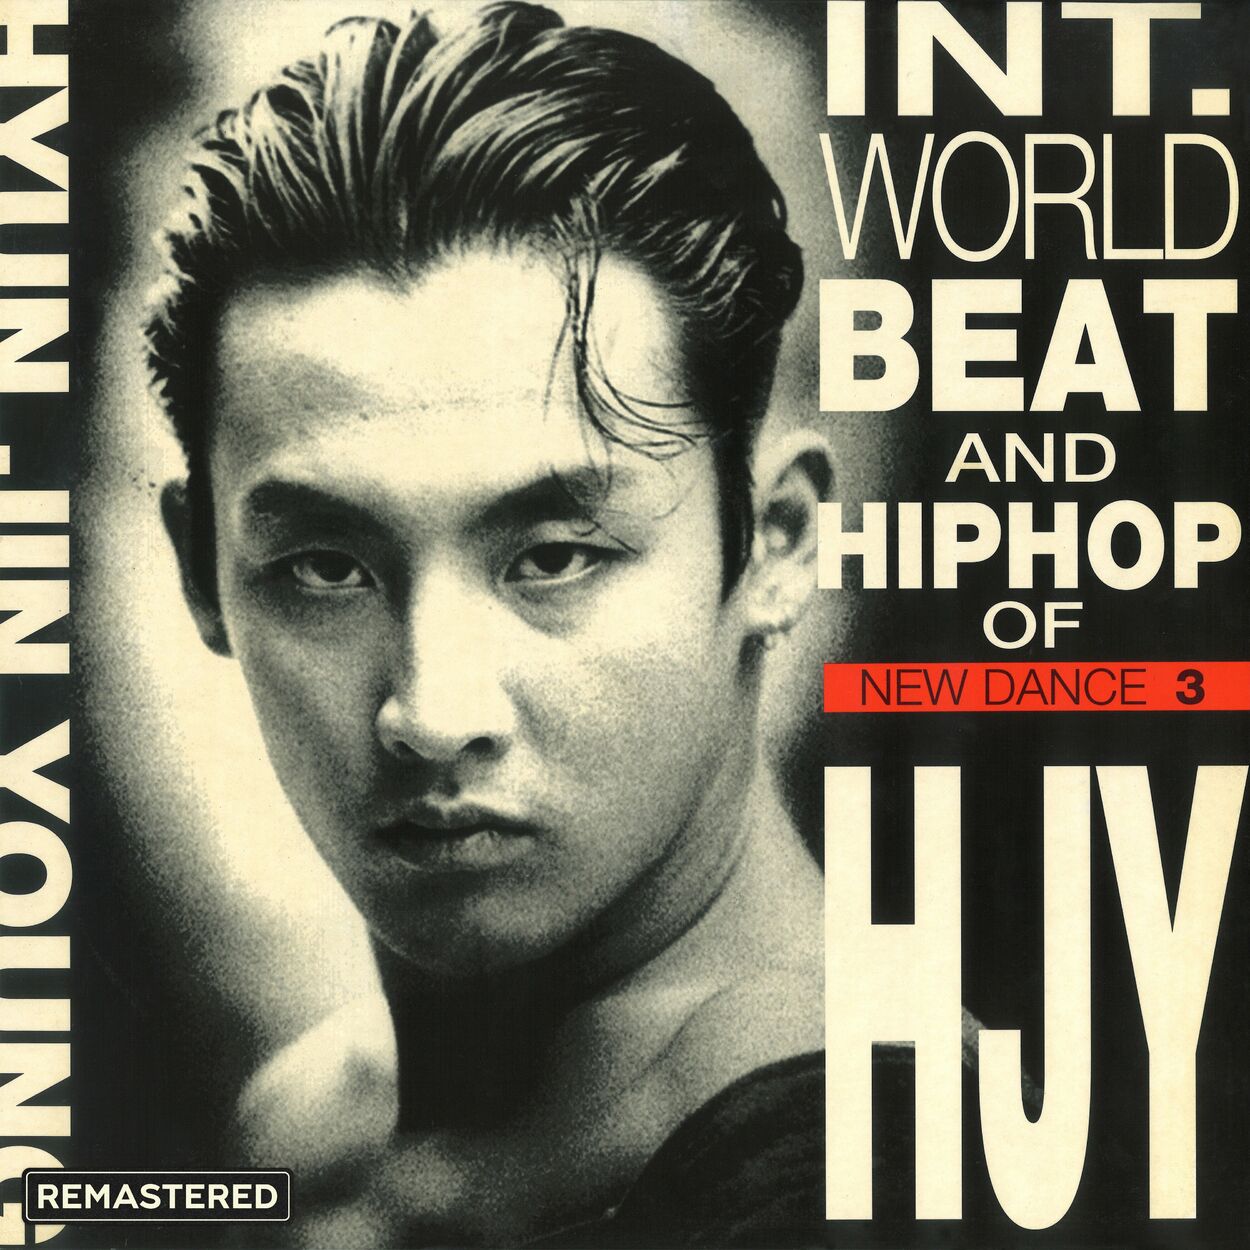 HYUN JIN YOUNG – New Dance 3 (Remastered)